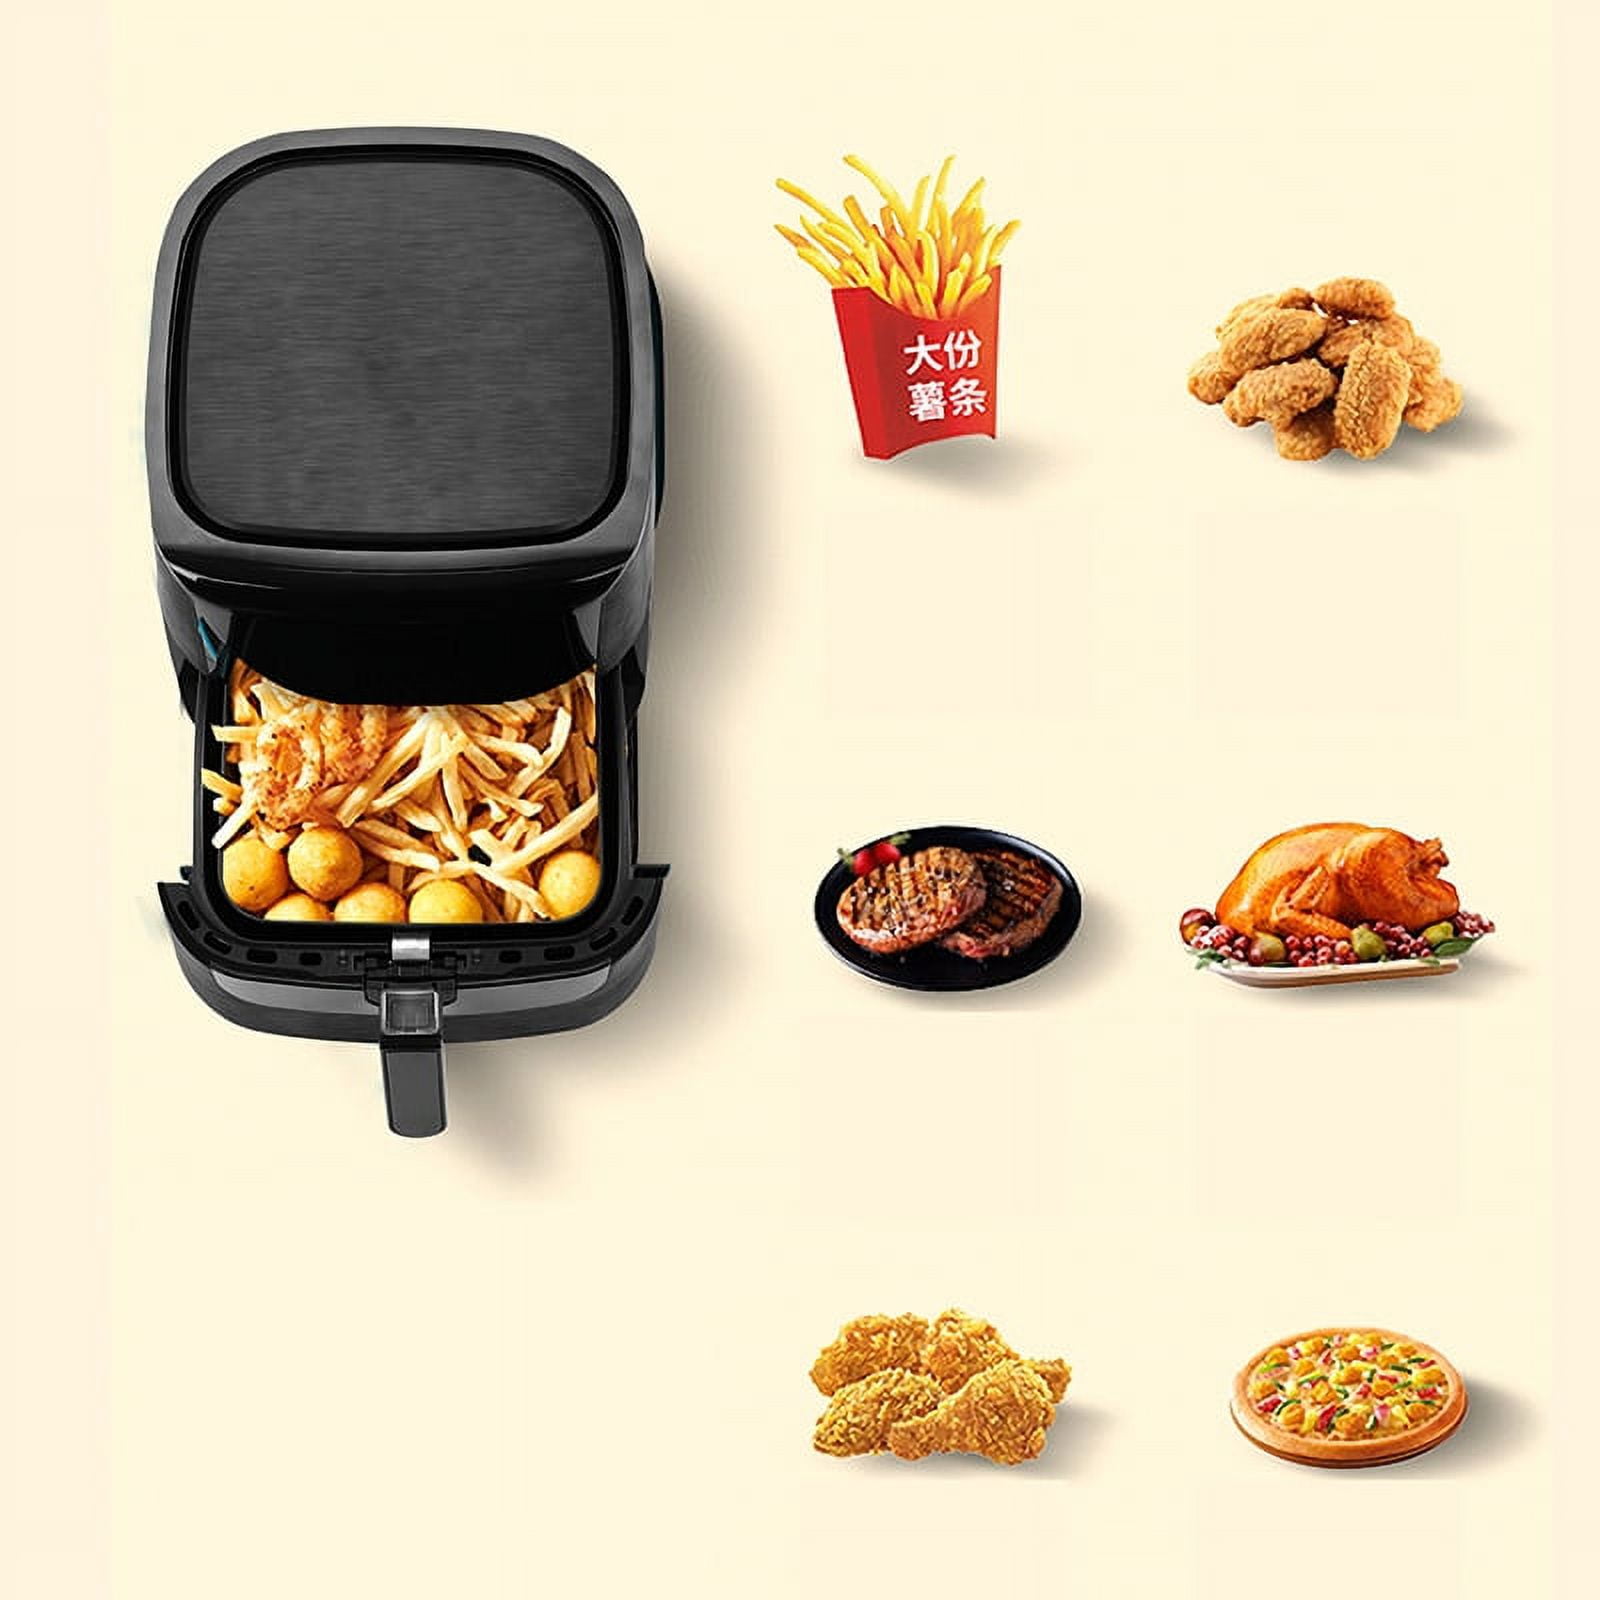 Ultrean Air Fryer, 4.2 Quart (4 Liter) Electric Hot Air Fryers Oven Oilless  Cooker with LCD Digital Screen and Nonstick Frying Pot, UL Certified,  1-Year, By Life Tools